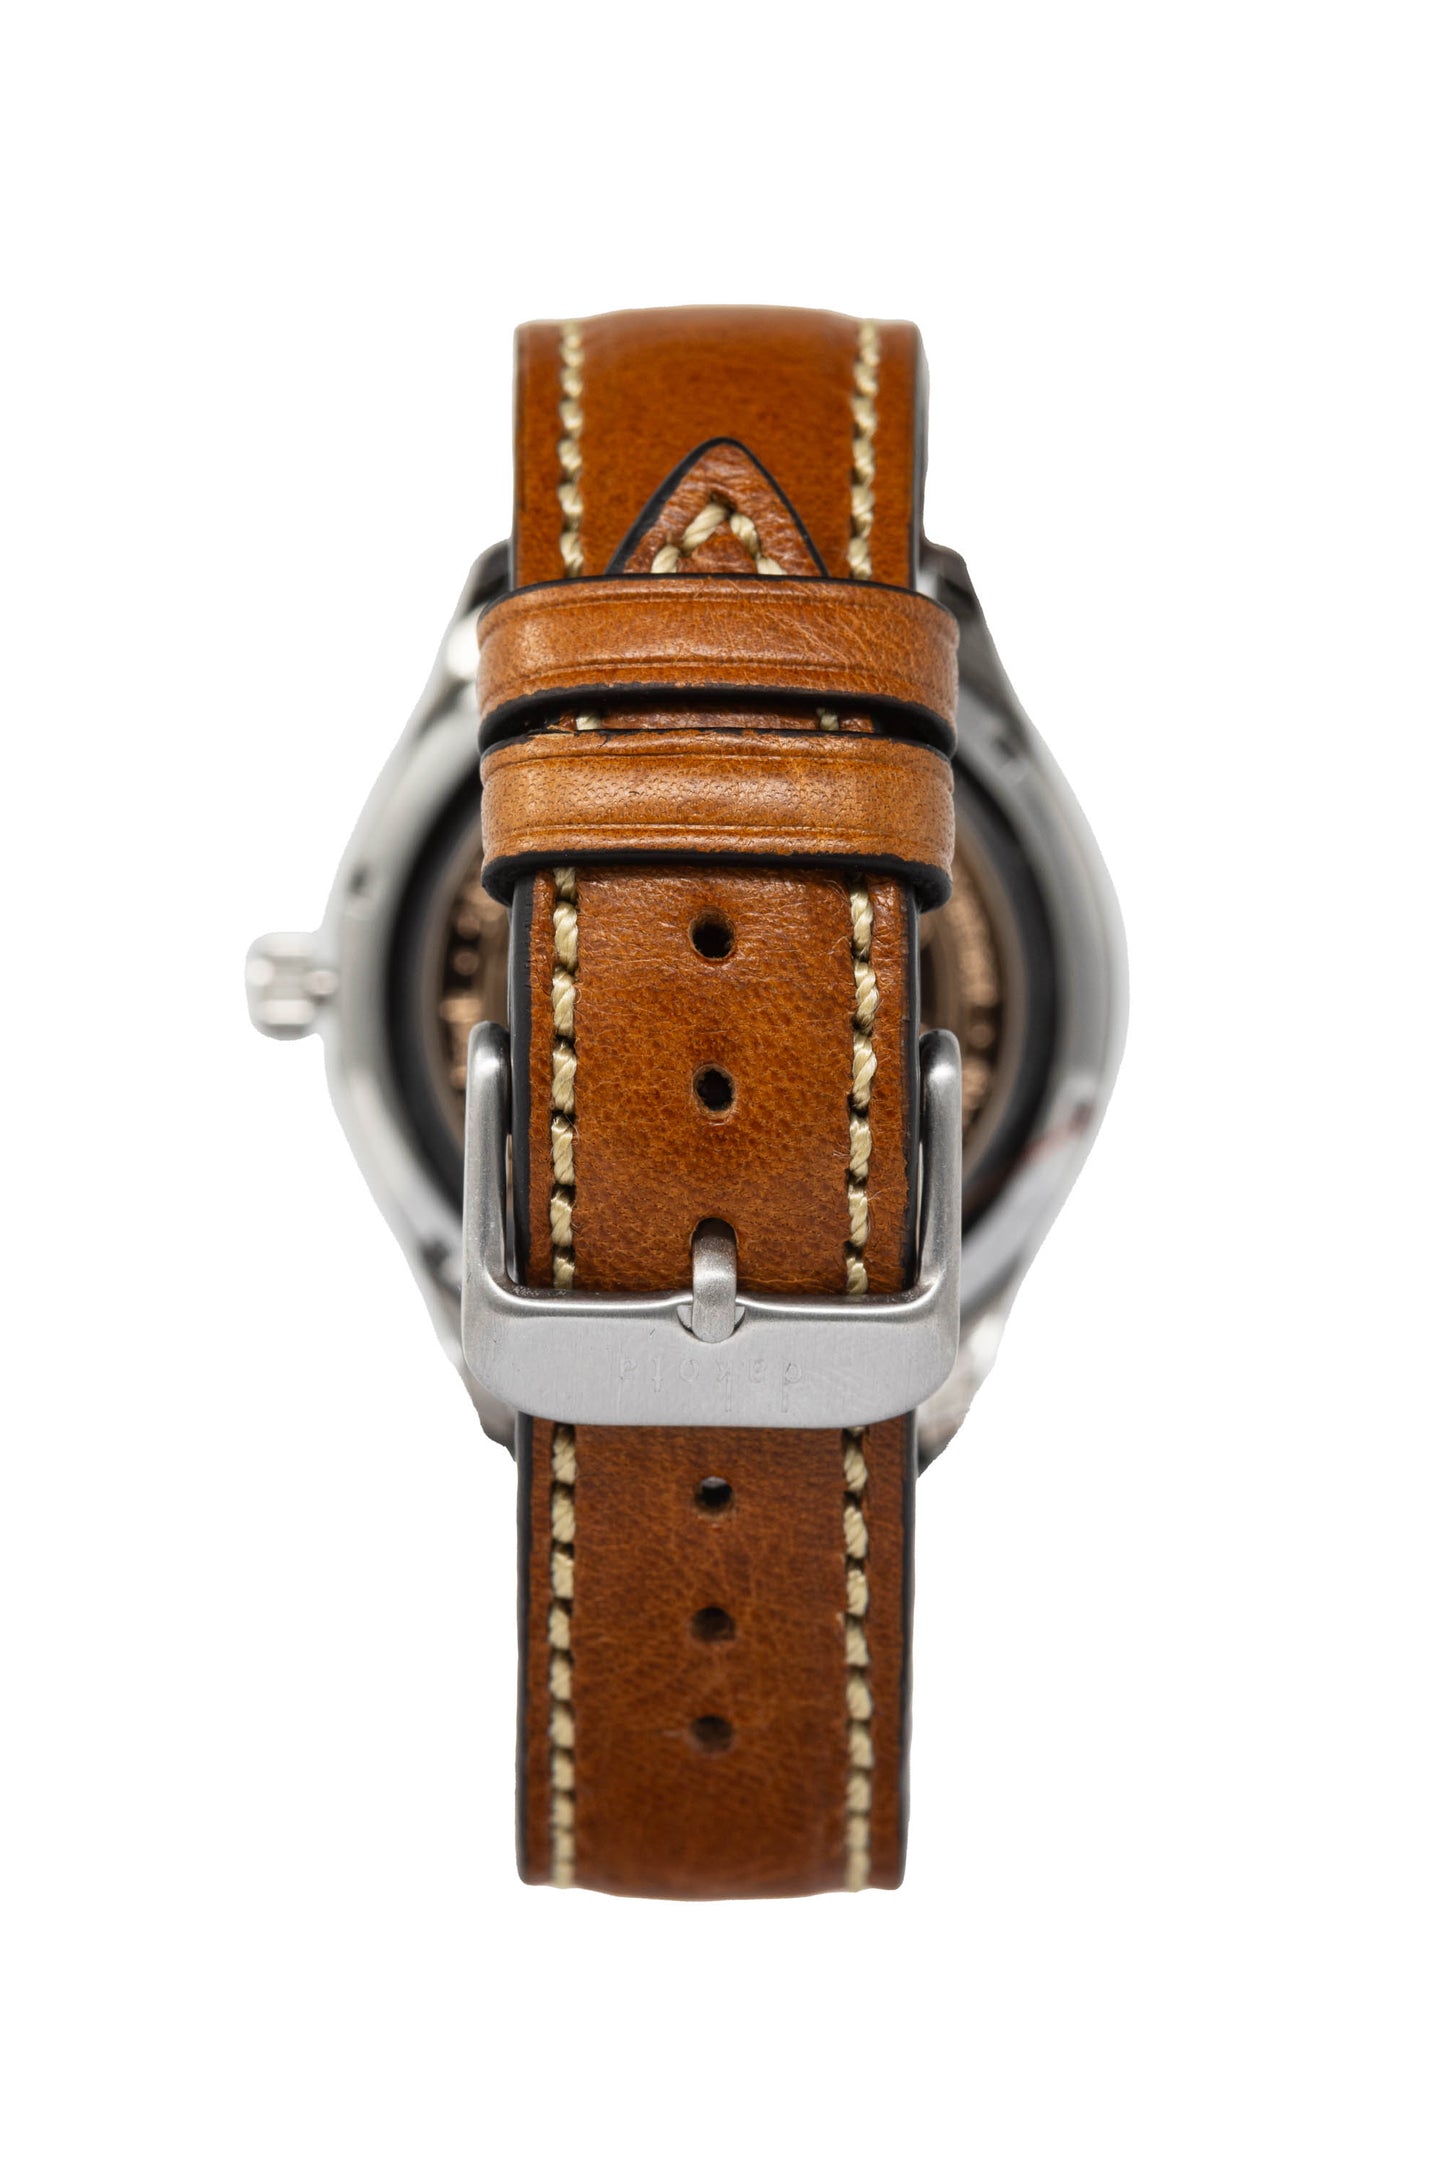 Copperback - SS Case Copper Dial Corfu Leather Band